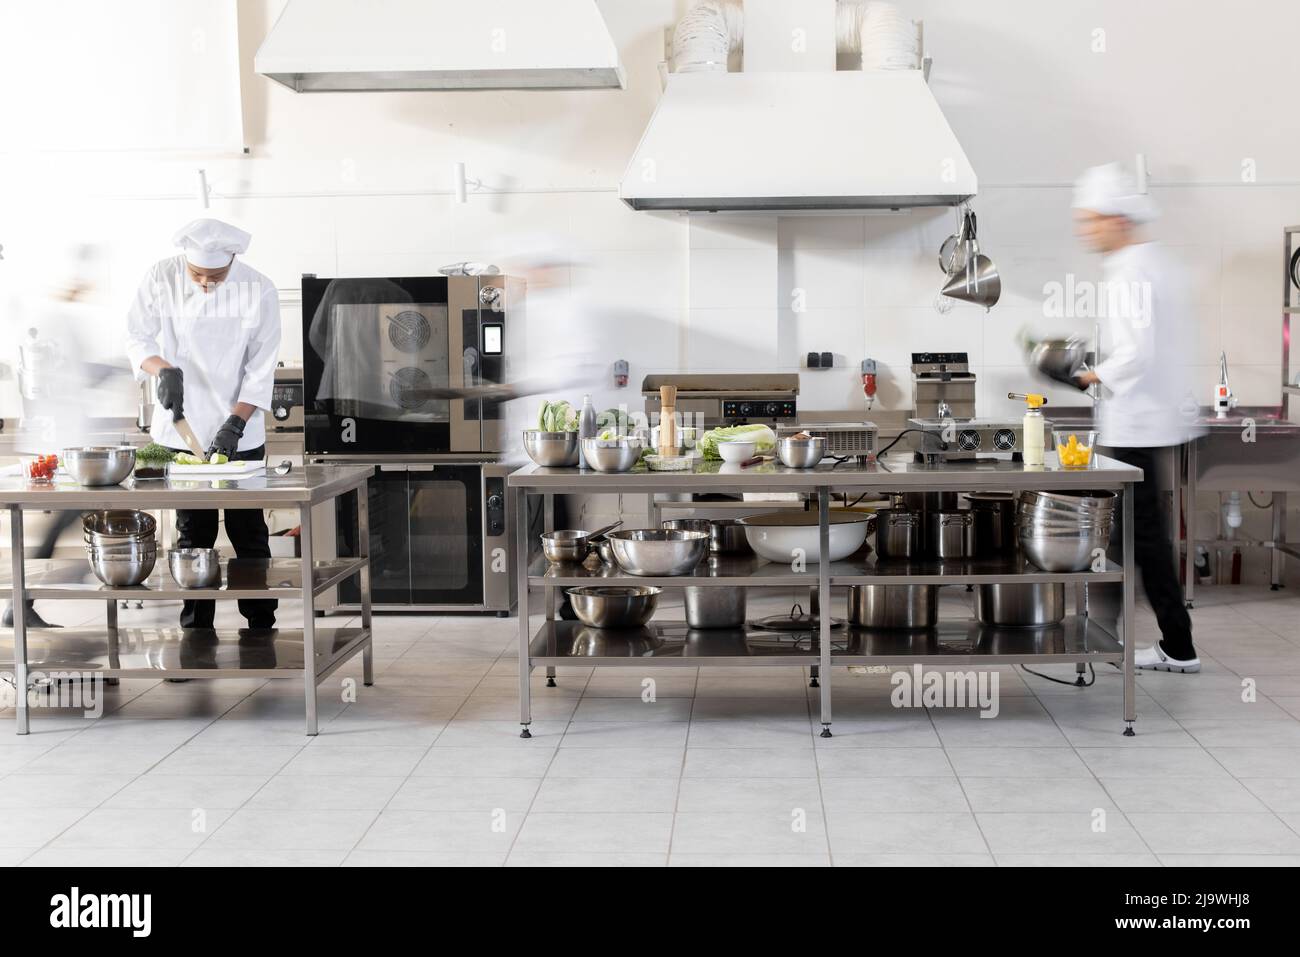 https://c8.alamy.com/comp/2J9WHJ8/chef-cooks-working-in-professional-kitchen-chefs-hurry-up-actively-cooking-meals-for-restaurant-long-exposure-with-motion-blurred-figures-2J9WHJ8.jpg